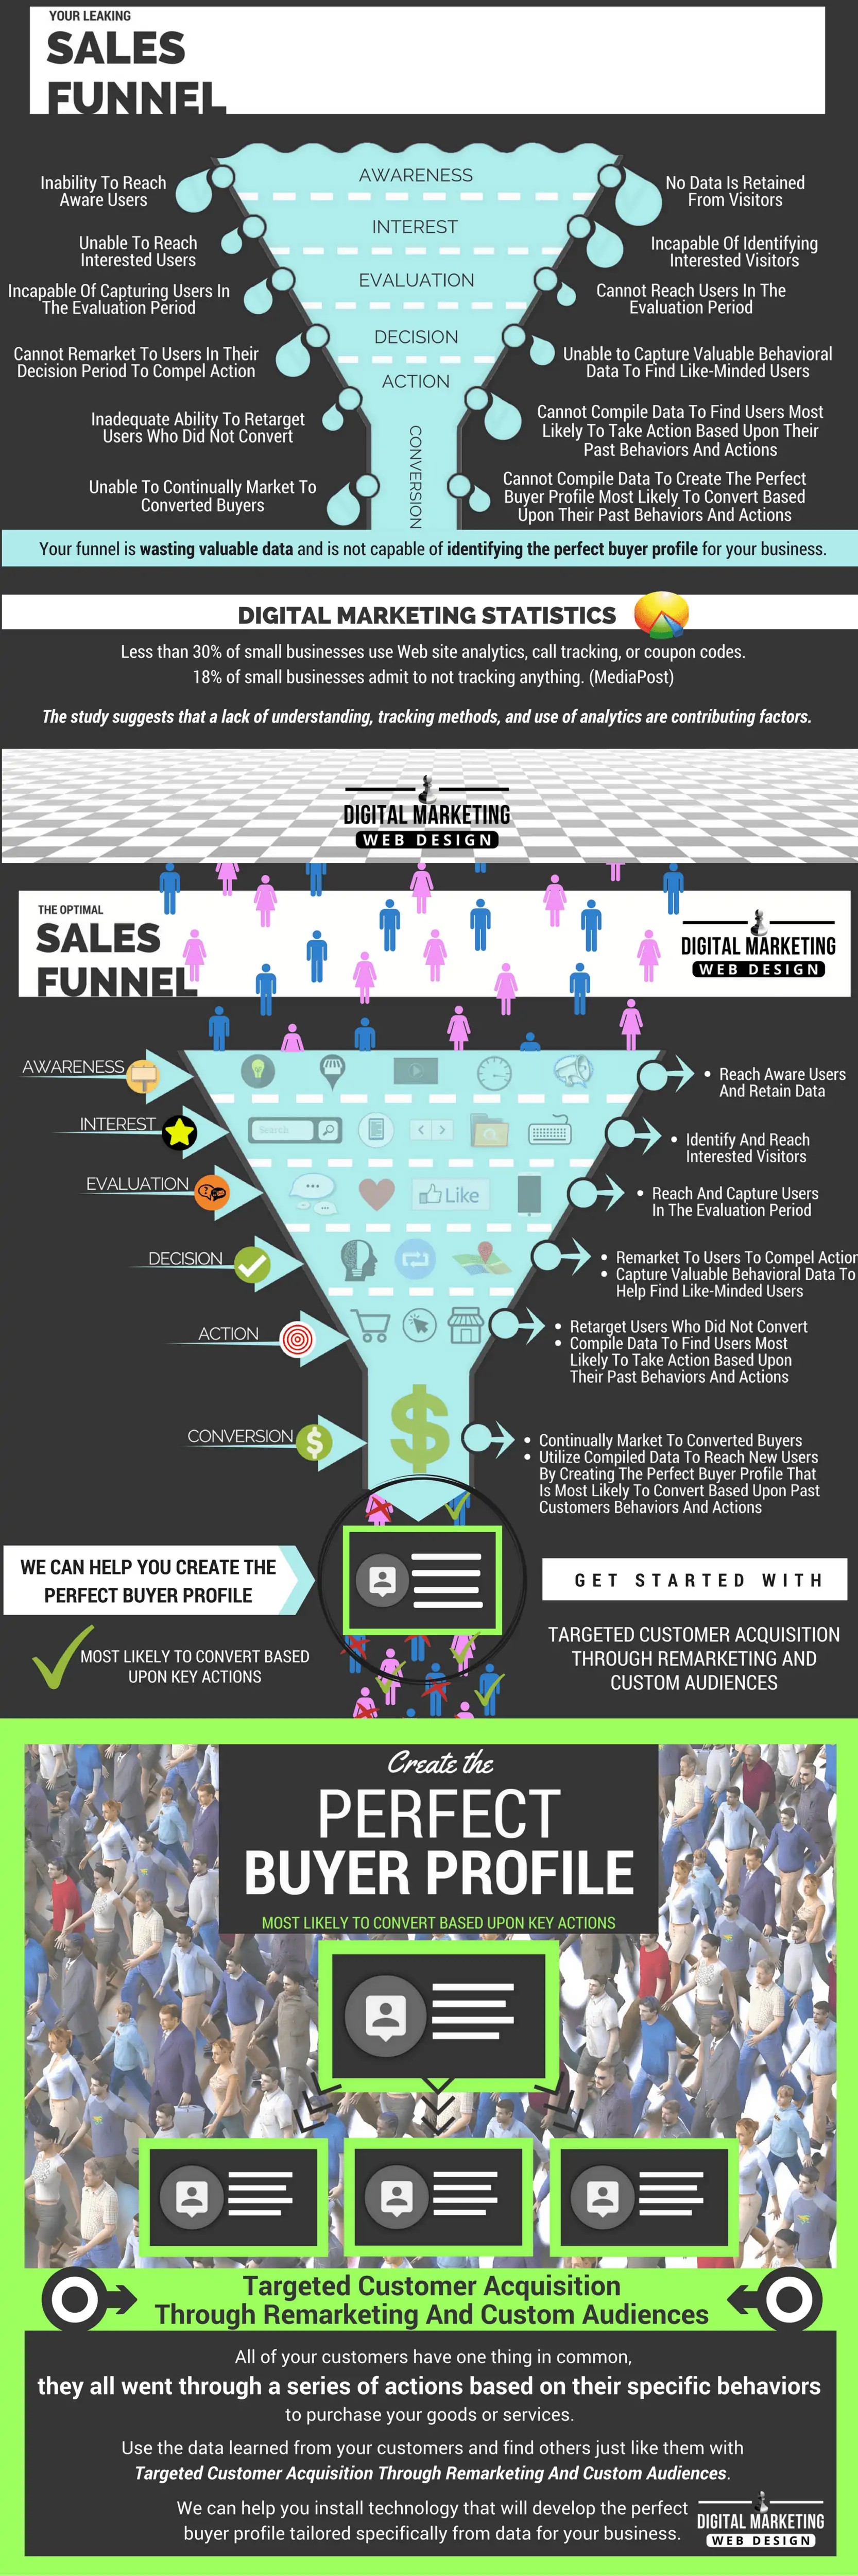 Your Leaking Online Sales Funnel - Targeted Customer Acquisition Through Remarketing and Custom Audiences